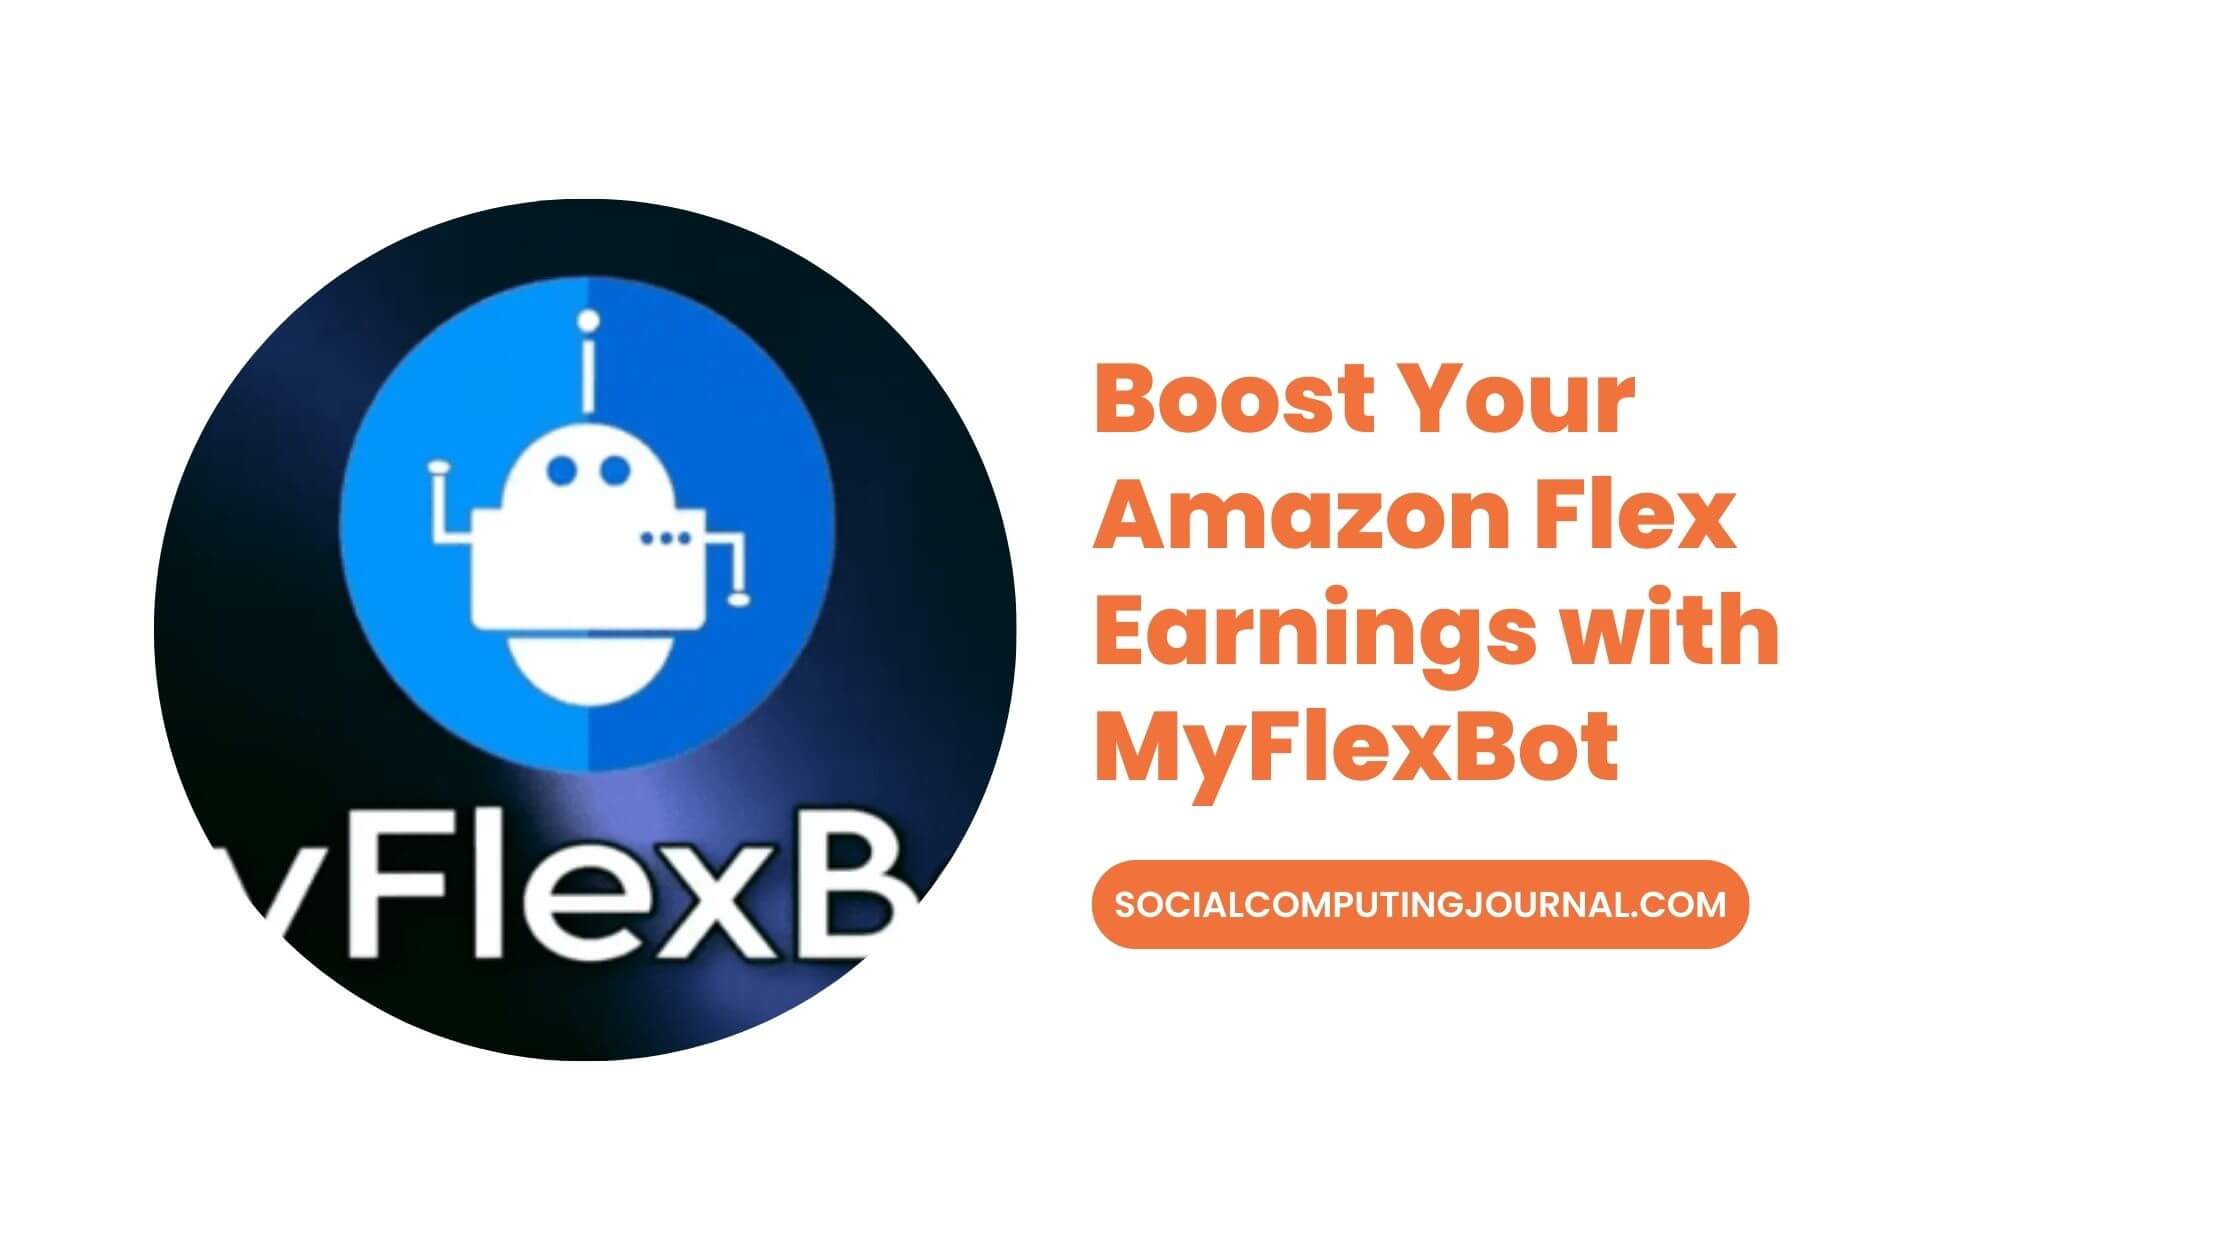 Boost Your Amazon Flex Earnings with MyFlexBot